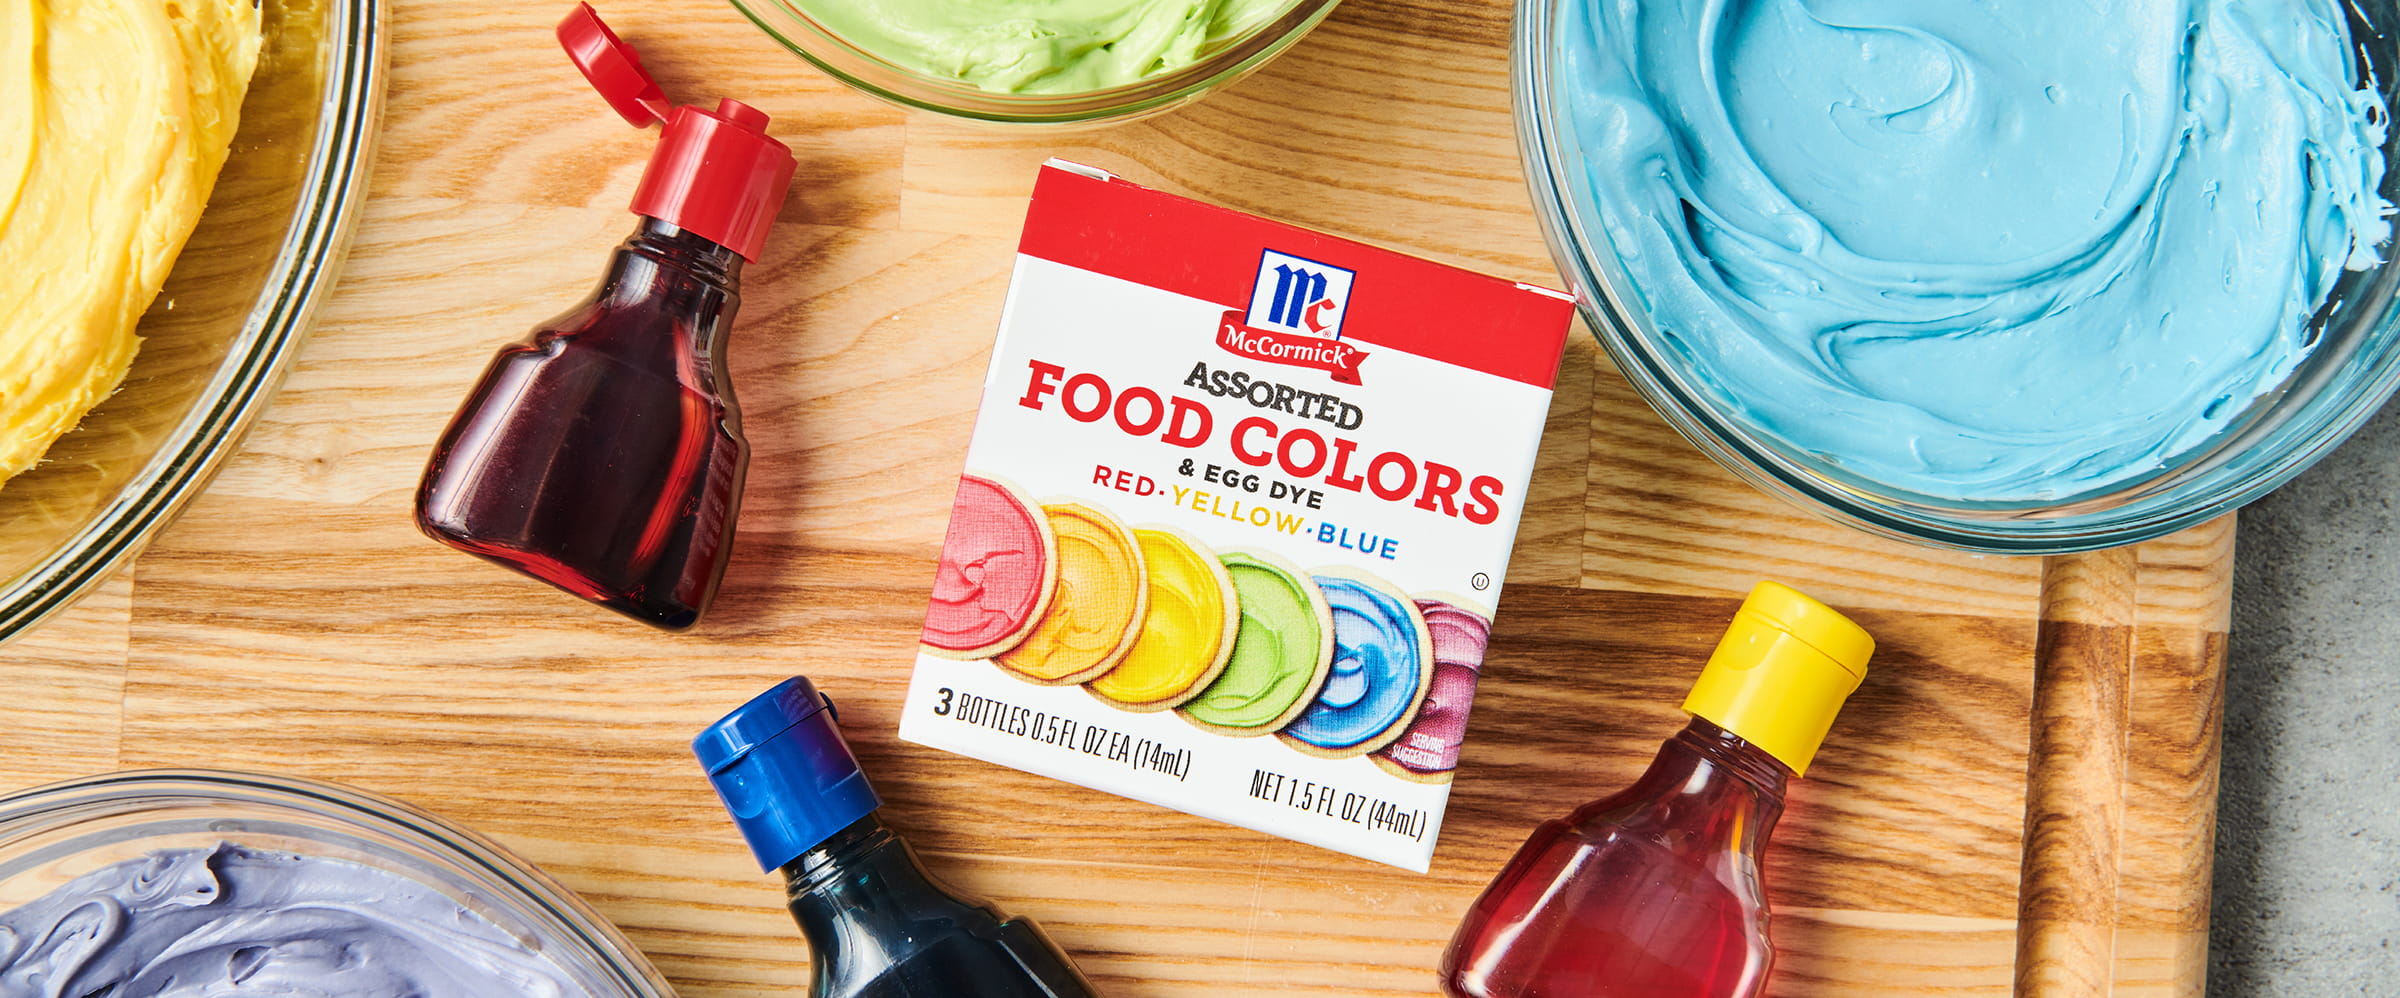 McCormick assorted food colors and egg dye